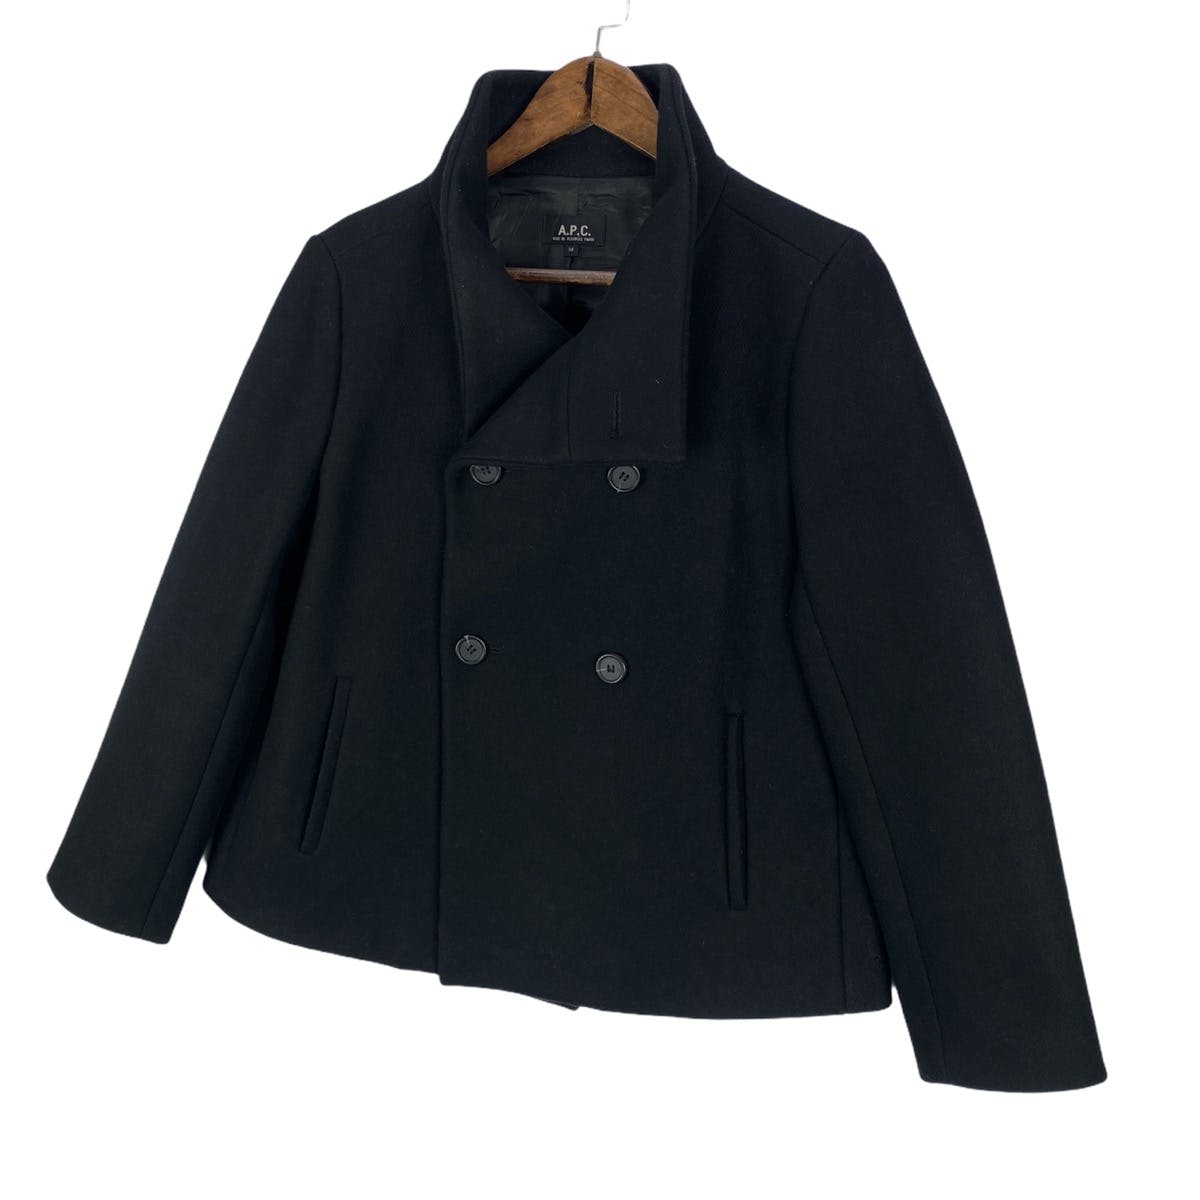 A.P.C Peacoat Wool Cropped Jacket Made In Poland - 5